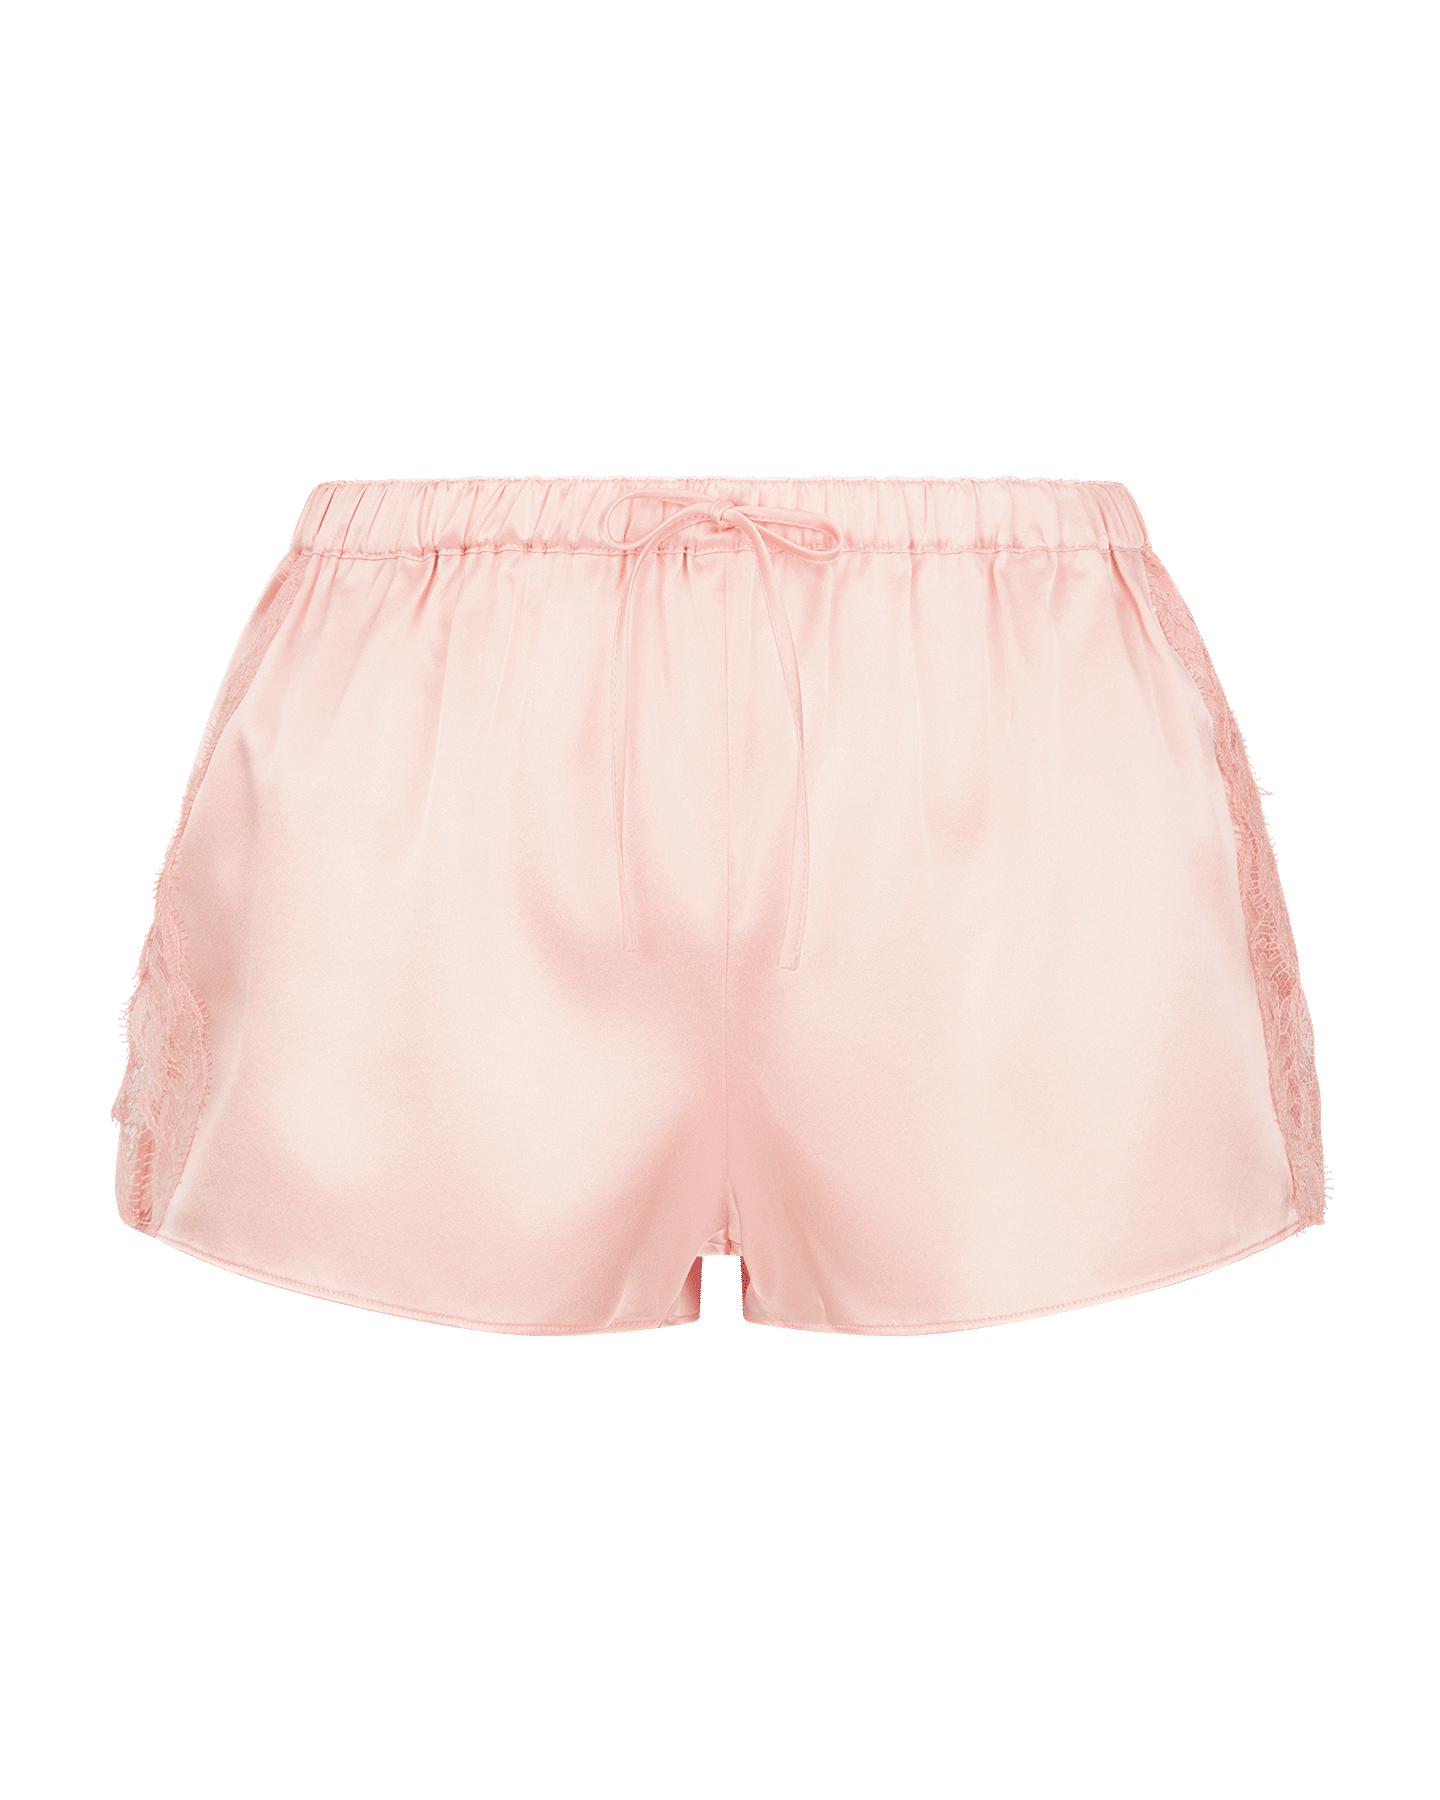 Gisele Shorts in Blush | By Agent Provocateur